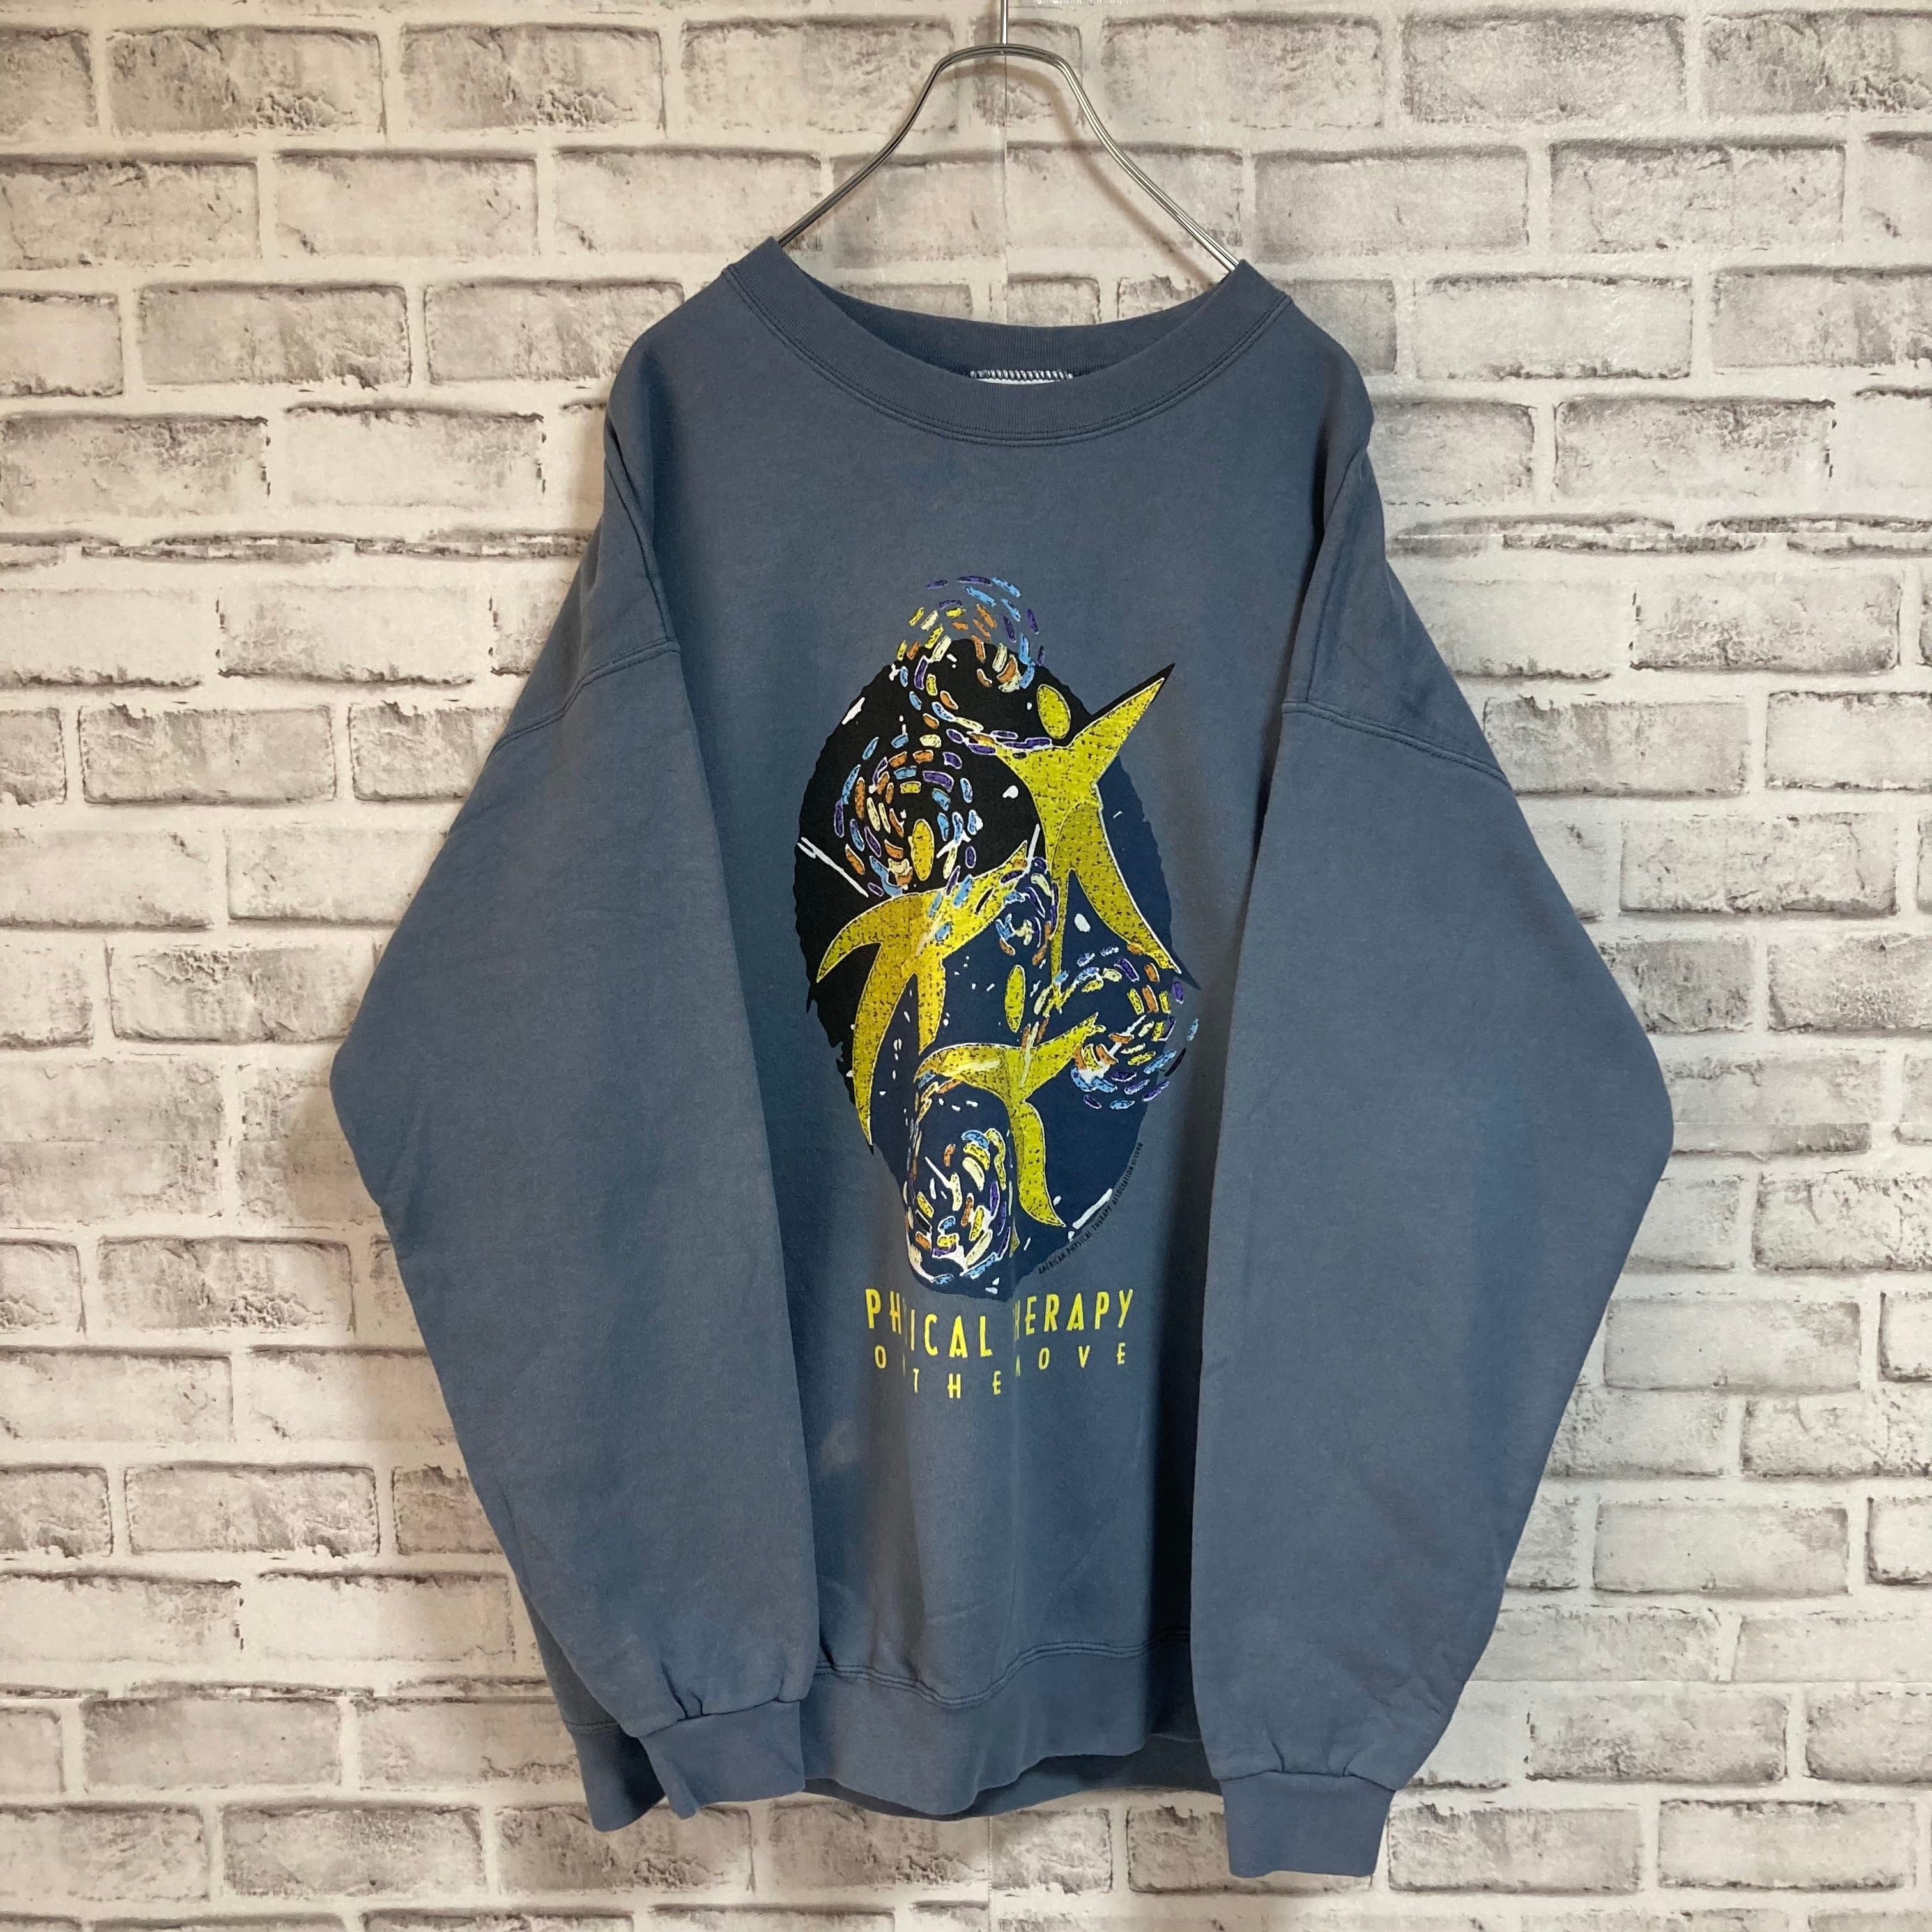 【Lee】L/S Sweat XL 90s Made in USA 企業モノ アート系 スウェット トレーナー USA製 アートプリント 肉厚  アメリカ USA 古着